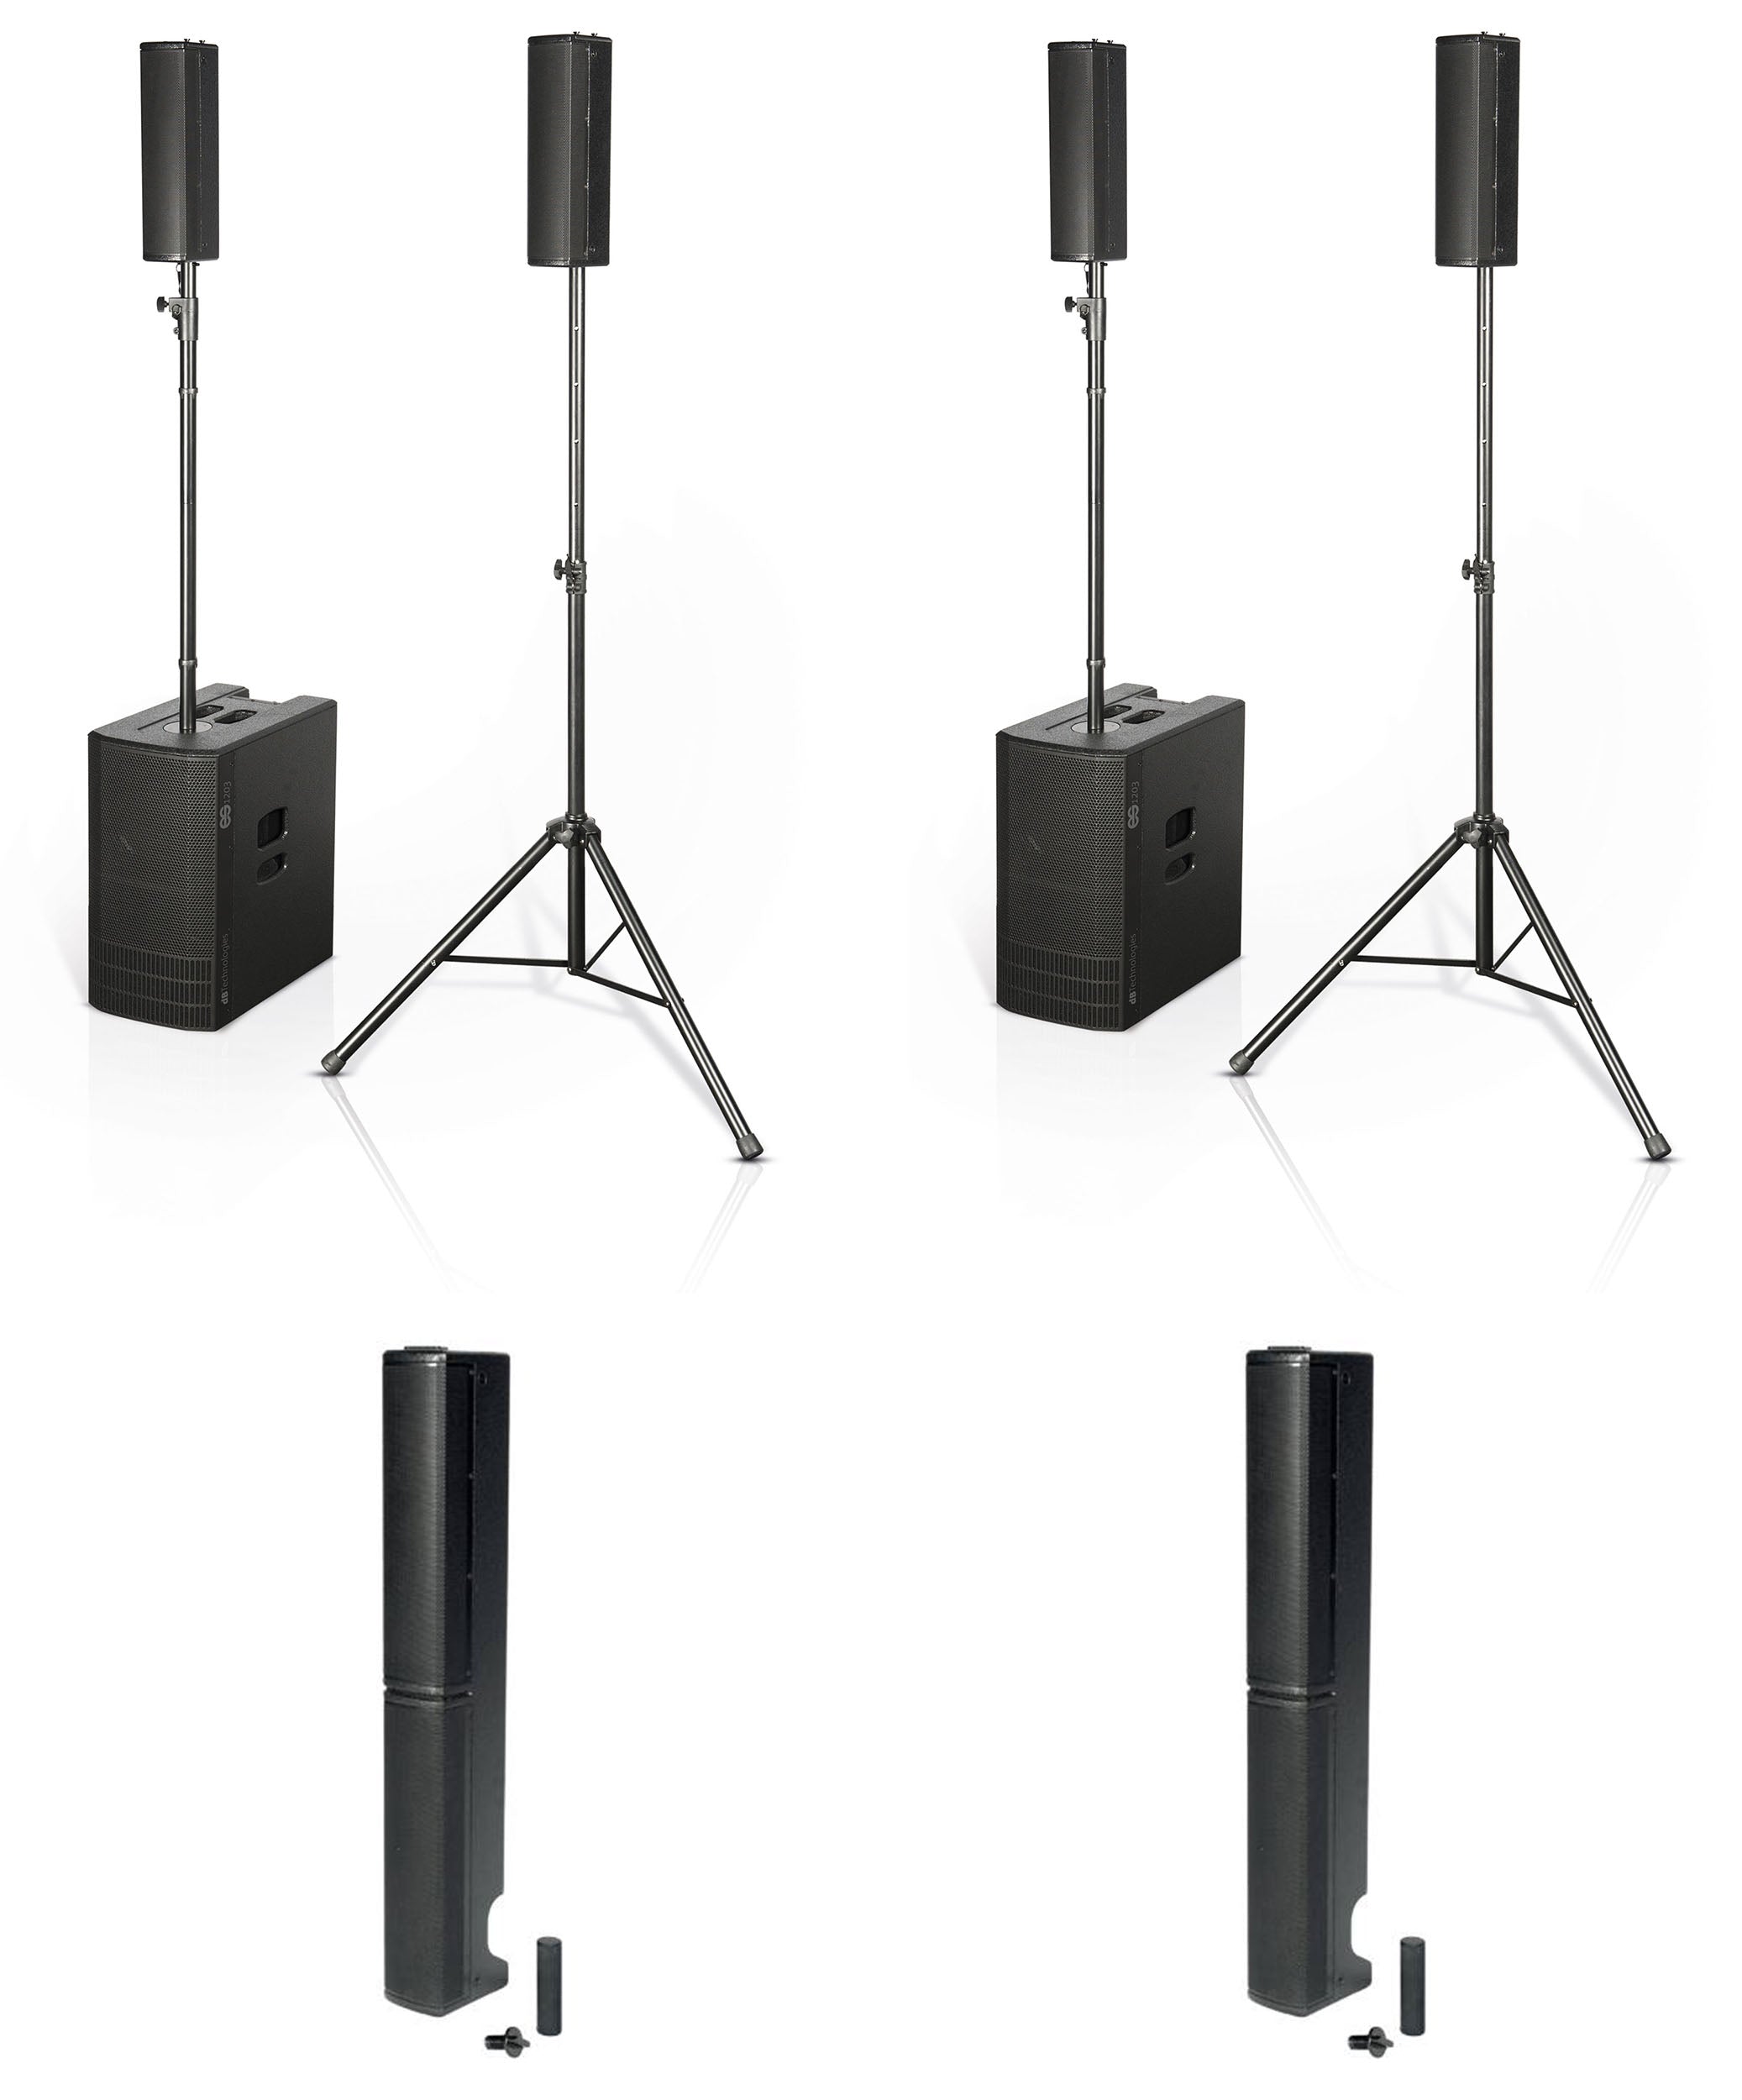 dB Technologies ES1203DP Portable Stereo Sound System DJ Package with Design Pole - Black by DB Technologies